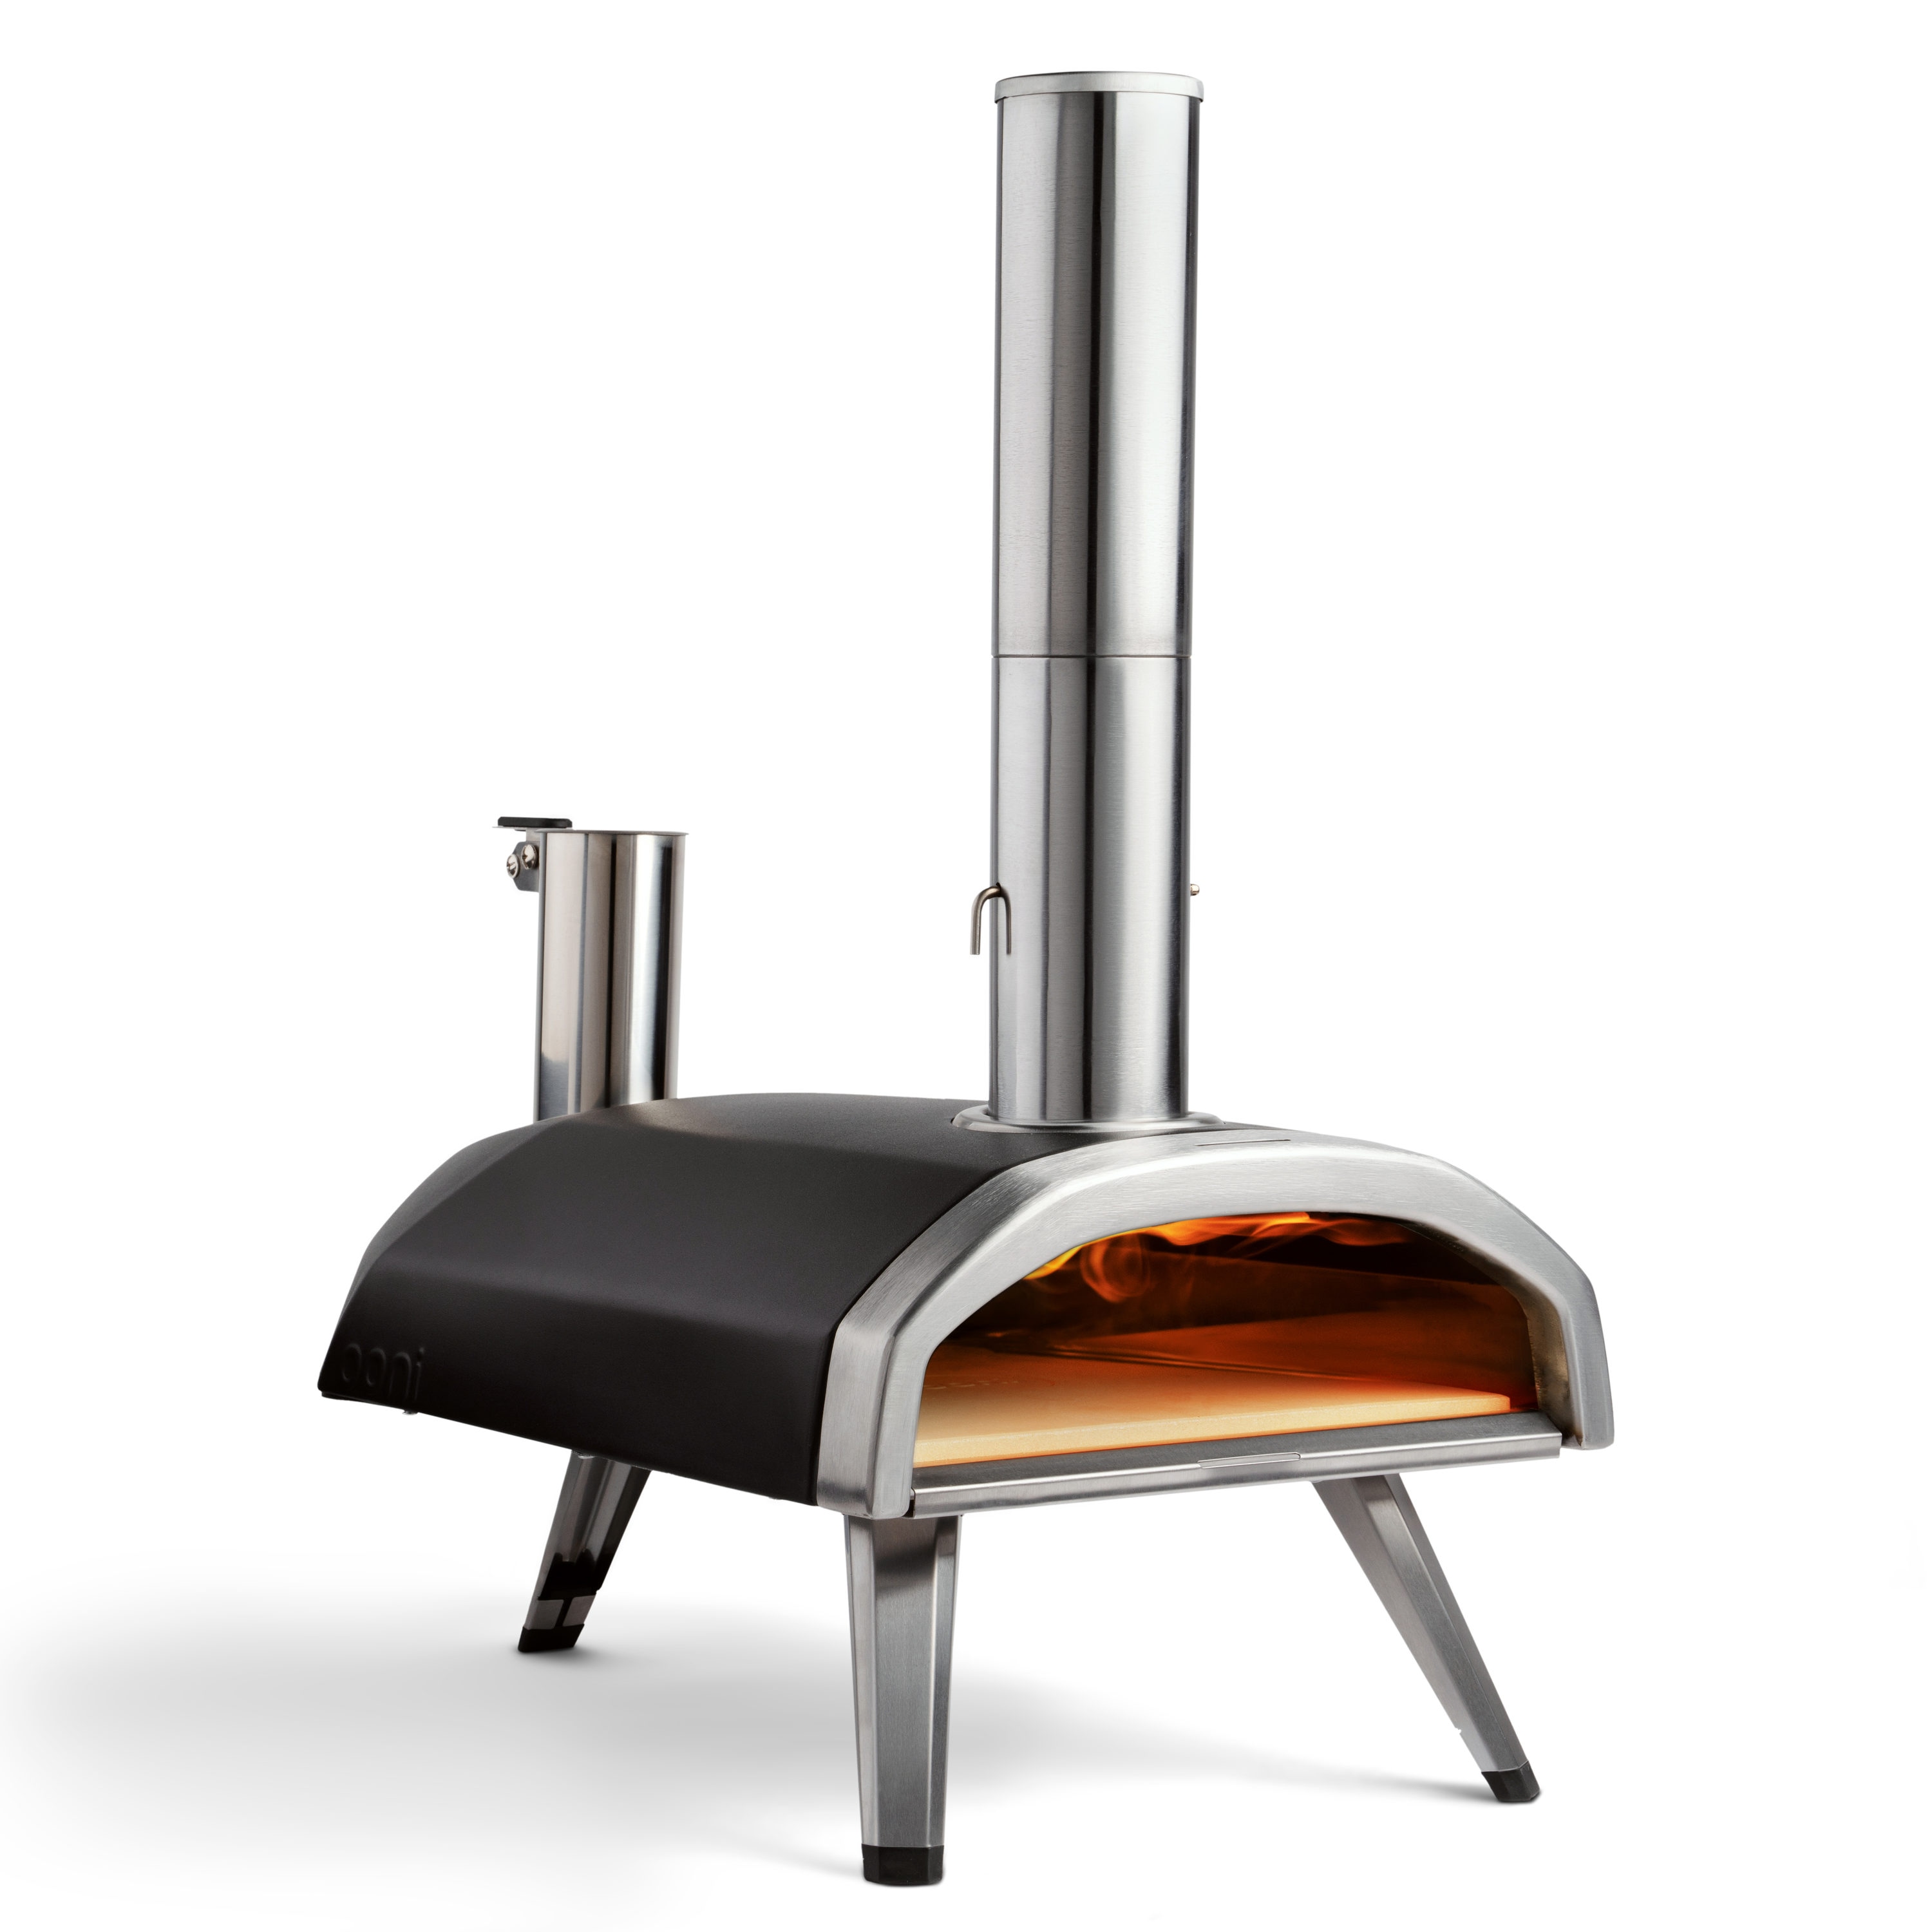 Outdoor wood fired oven Pizzone, large wood fire oven lightweight